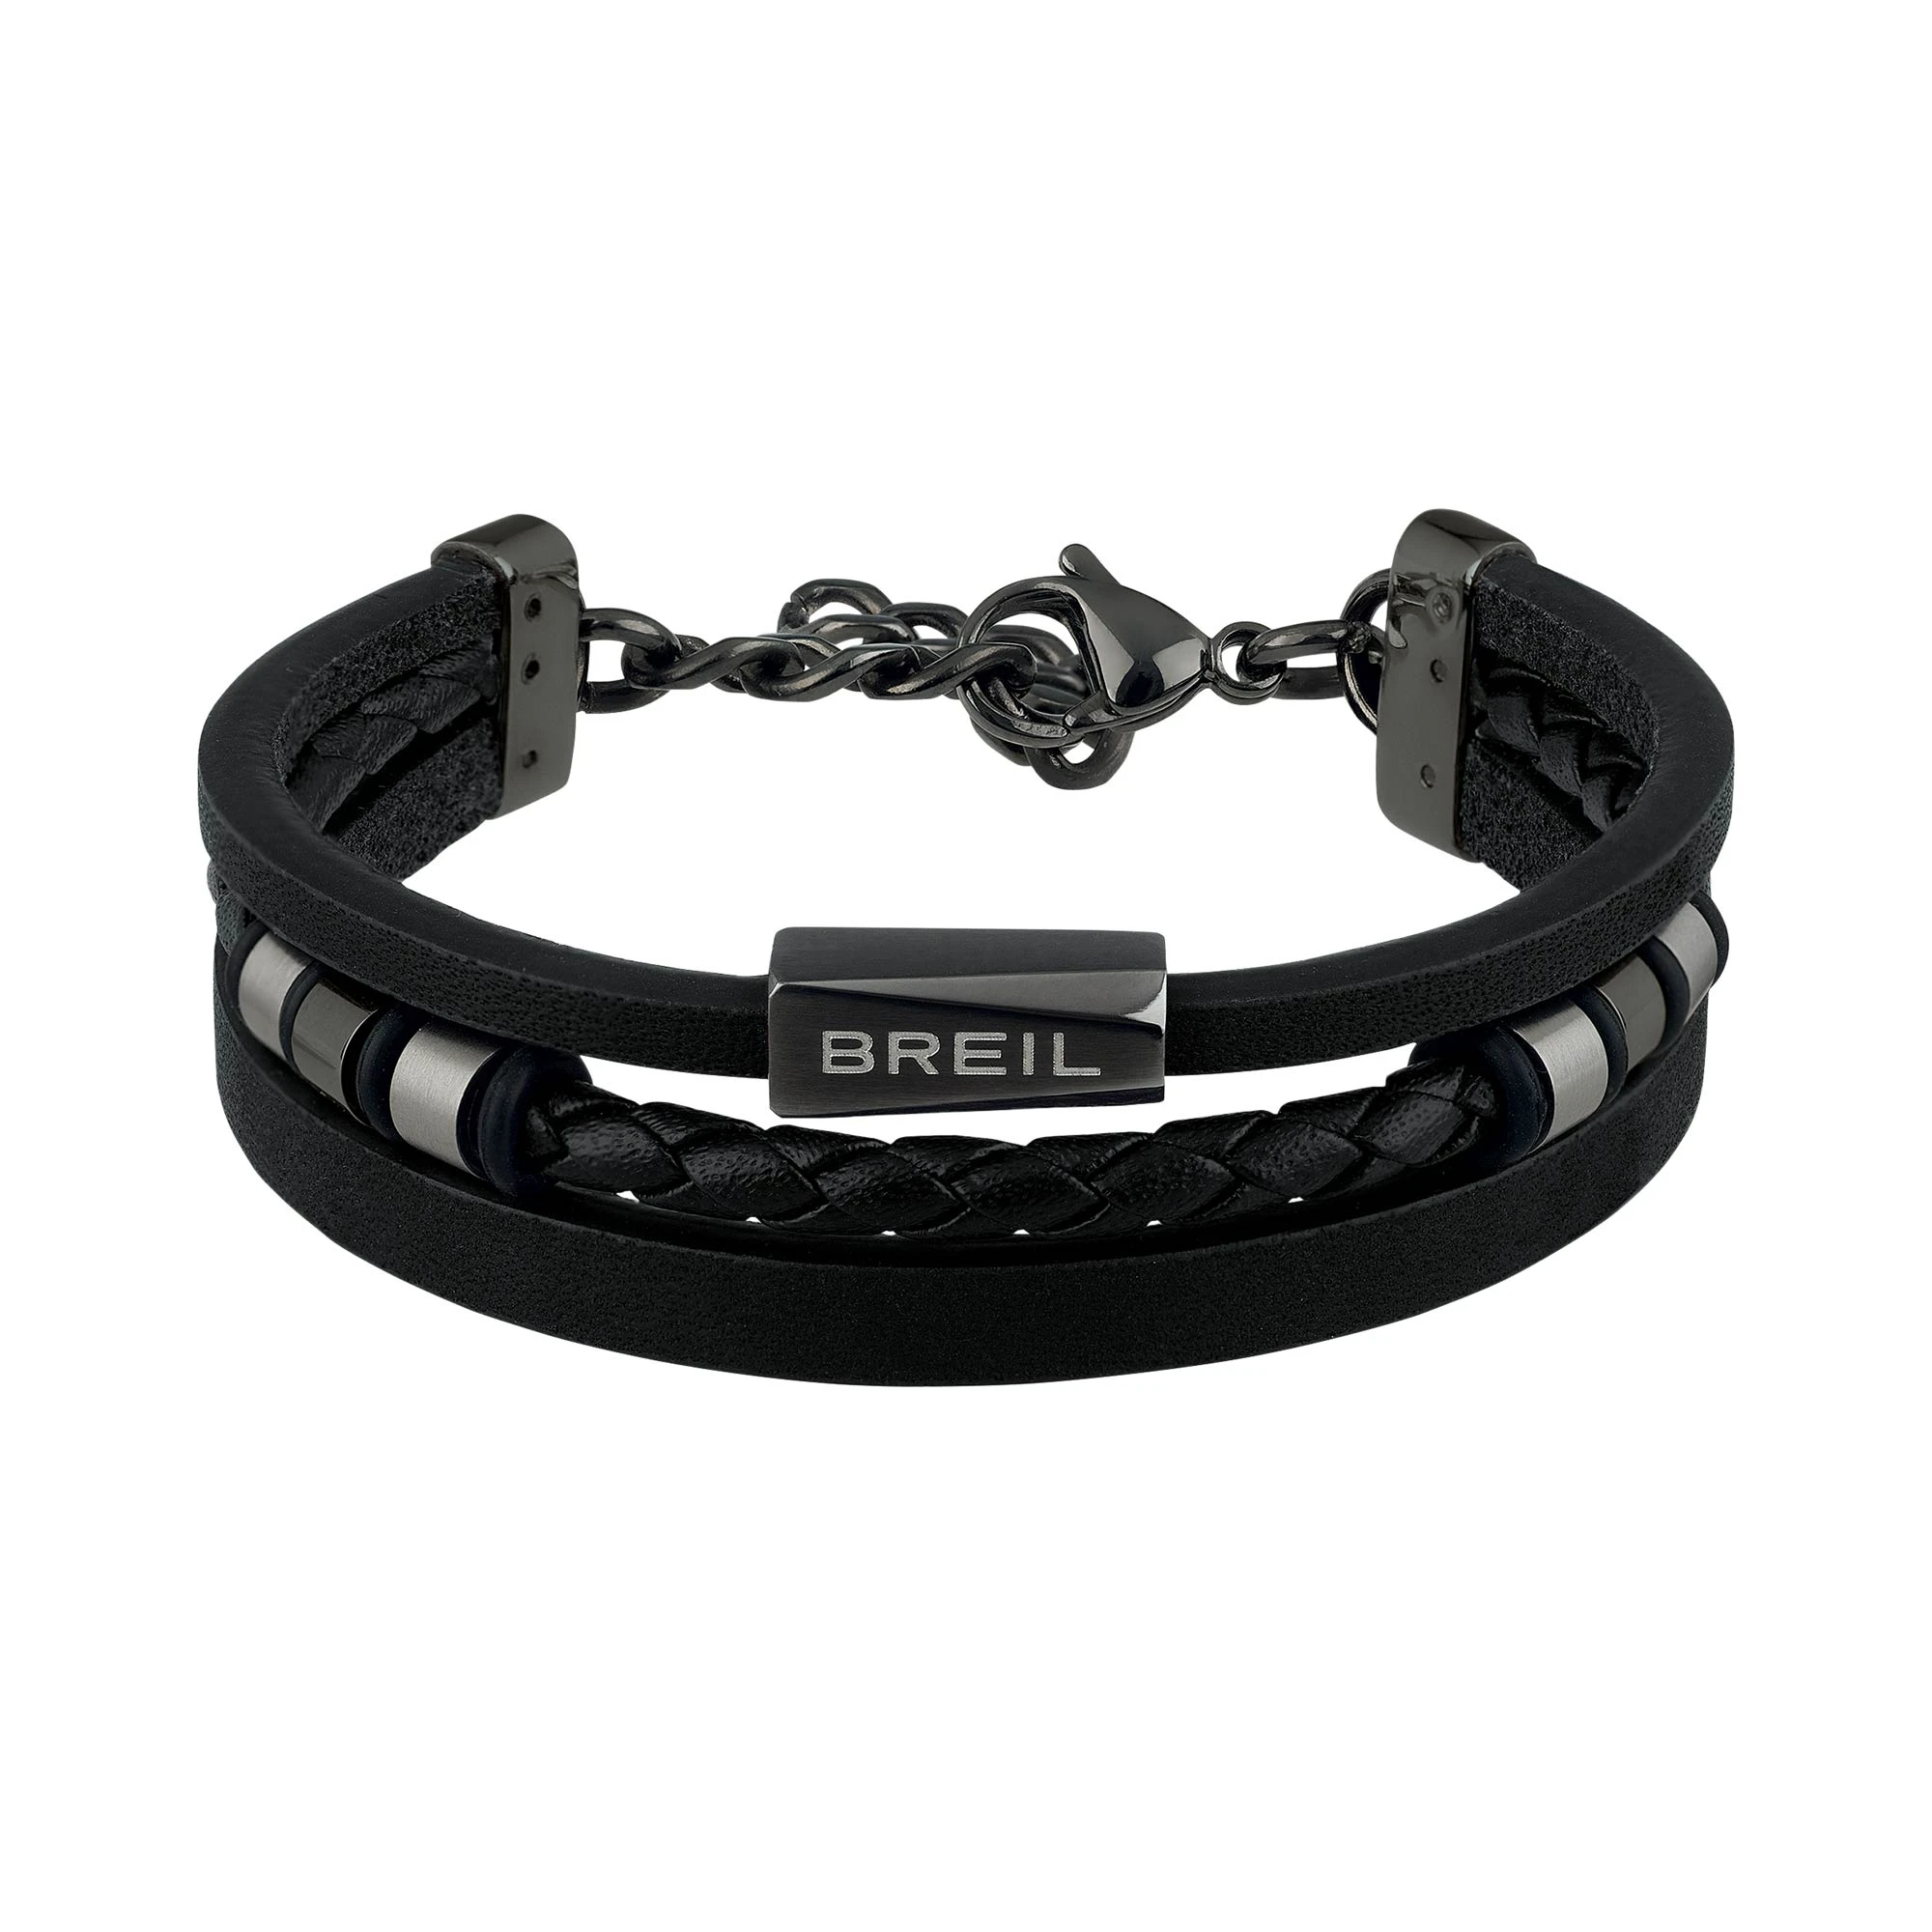 OUTER - BRACELET IN BLACK LEATHER AND STAINLESS STEEL DETAILS - 1 - TJ2668 | Breil